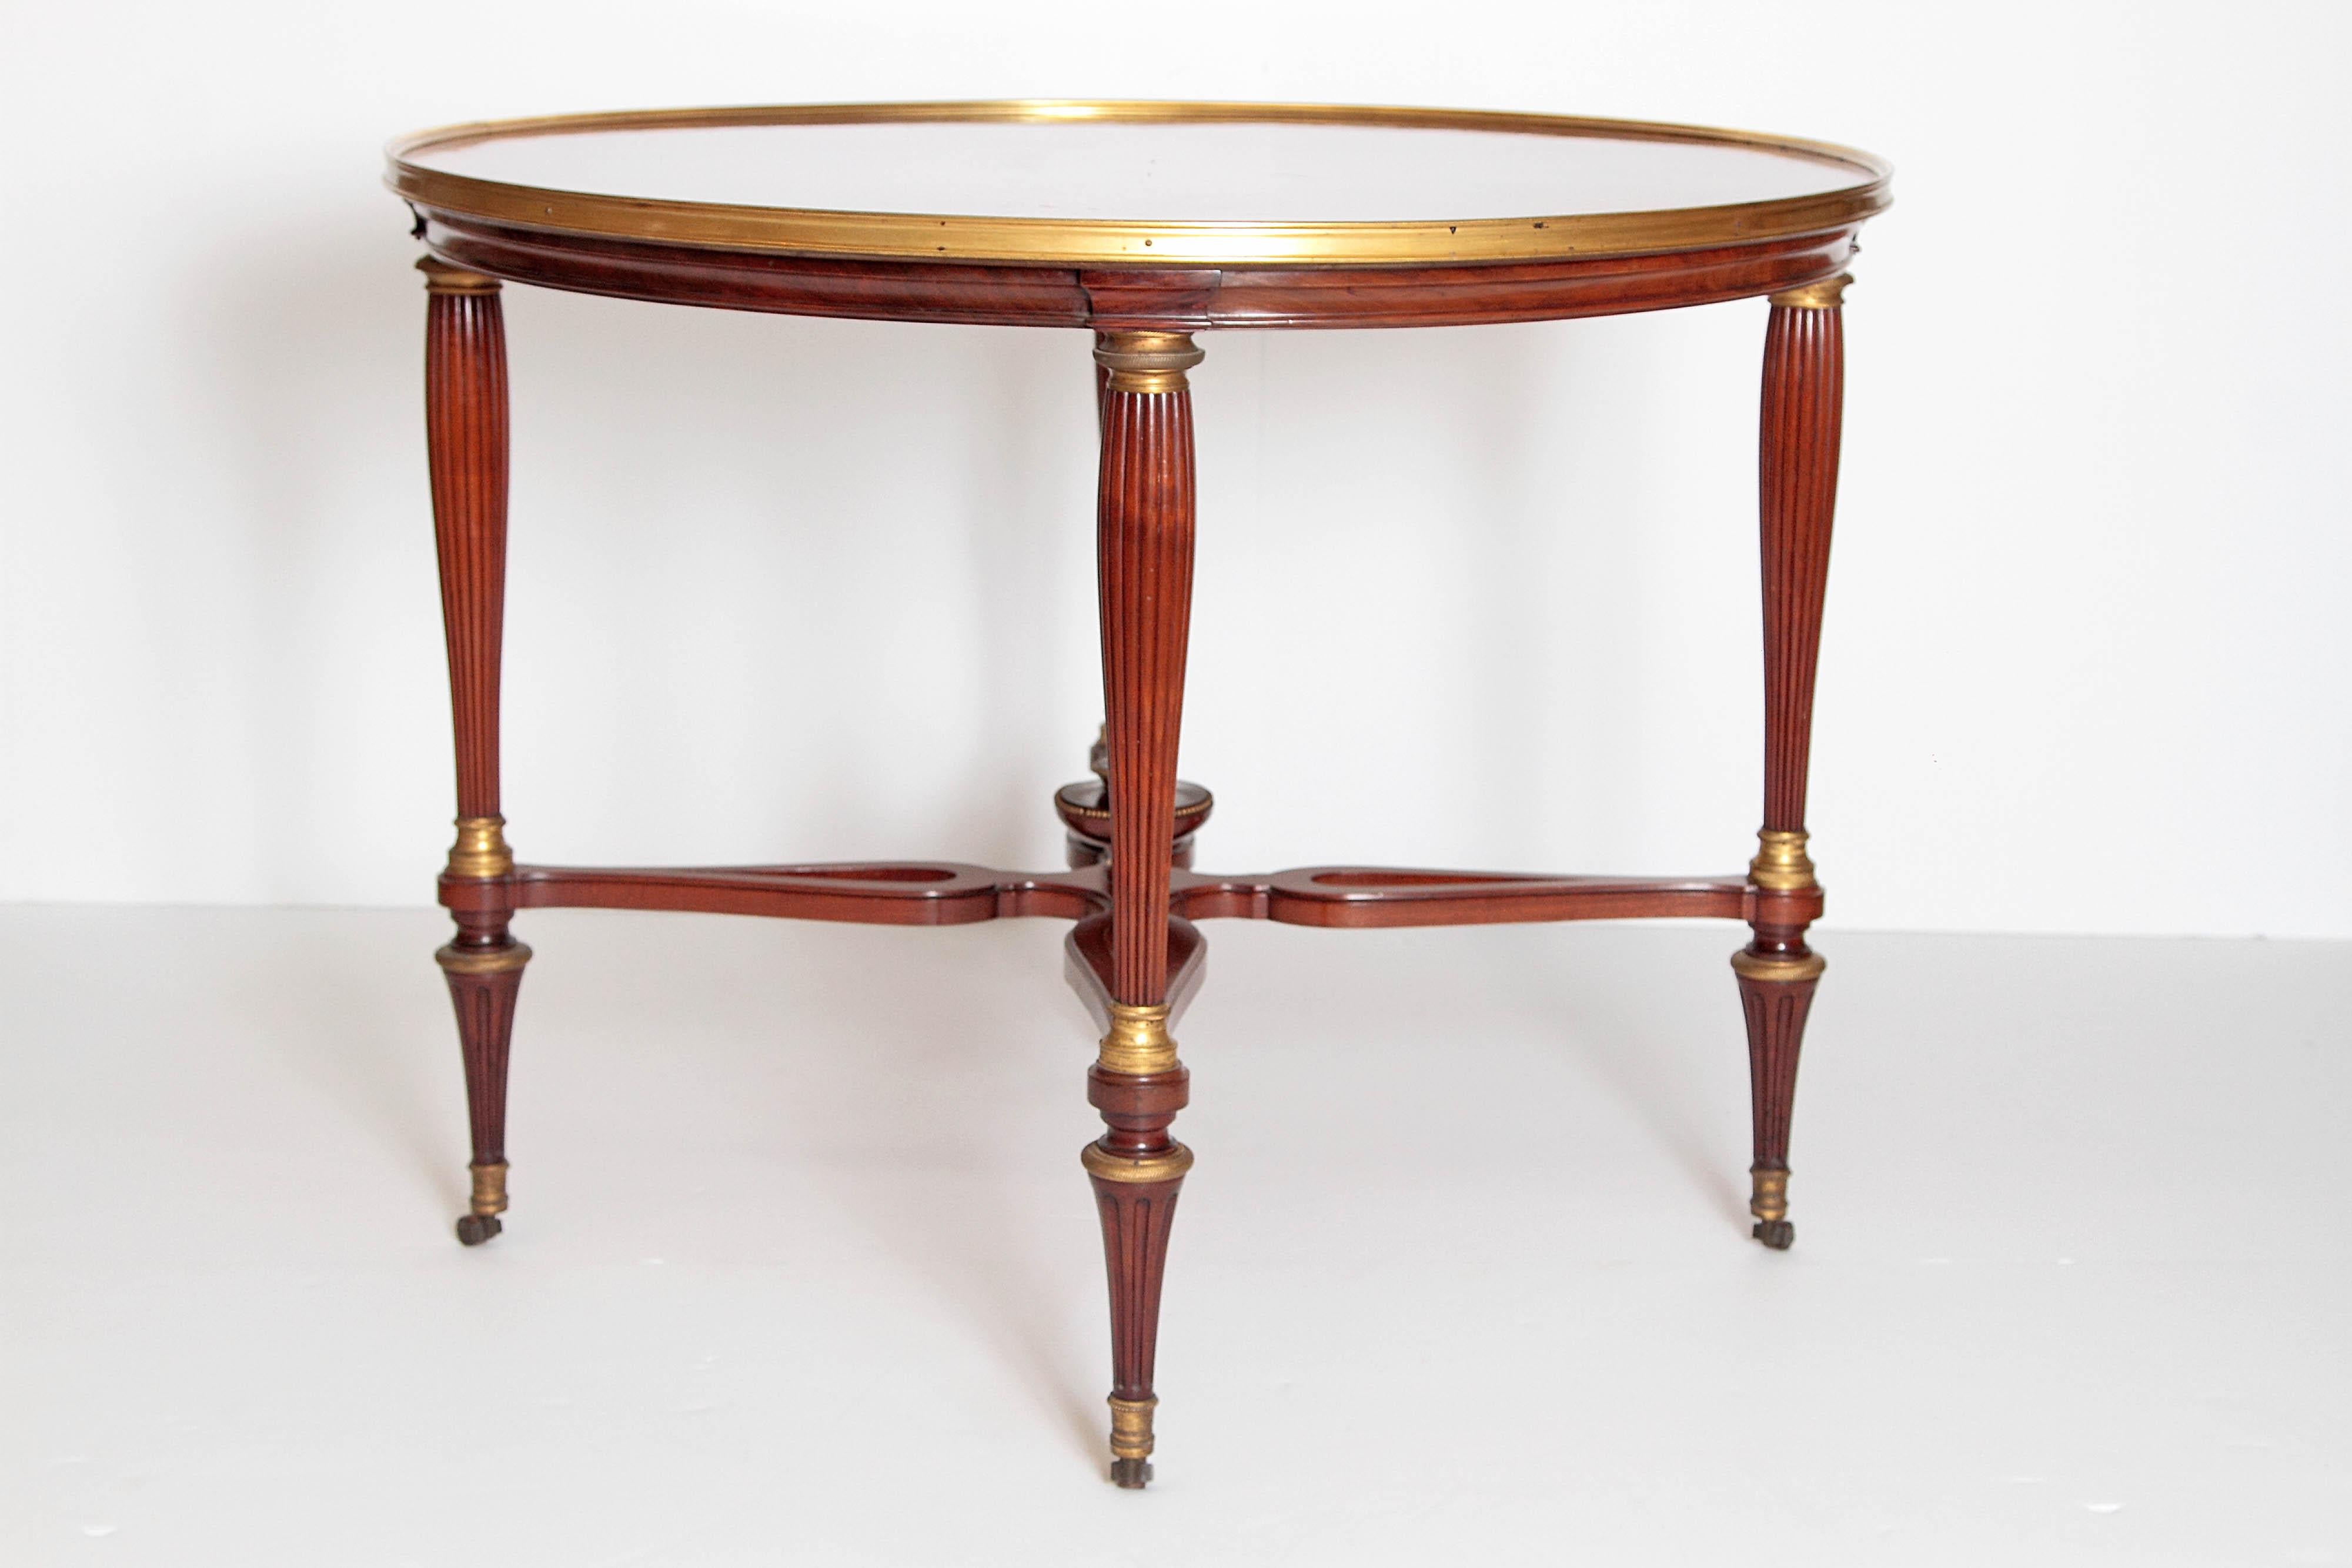 Bronze 19th Century Russian Neoclassical Centre Table with Burled Walnut Top